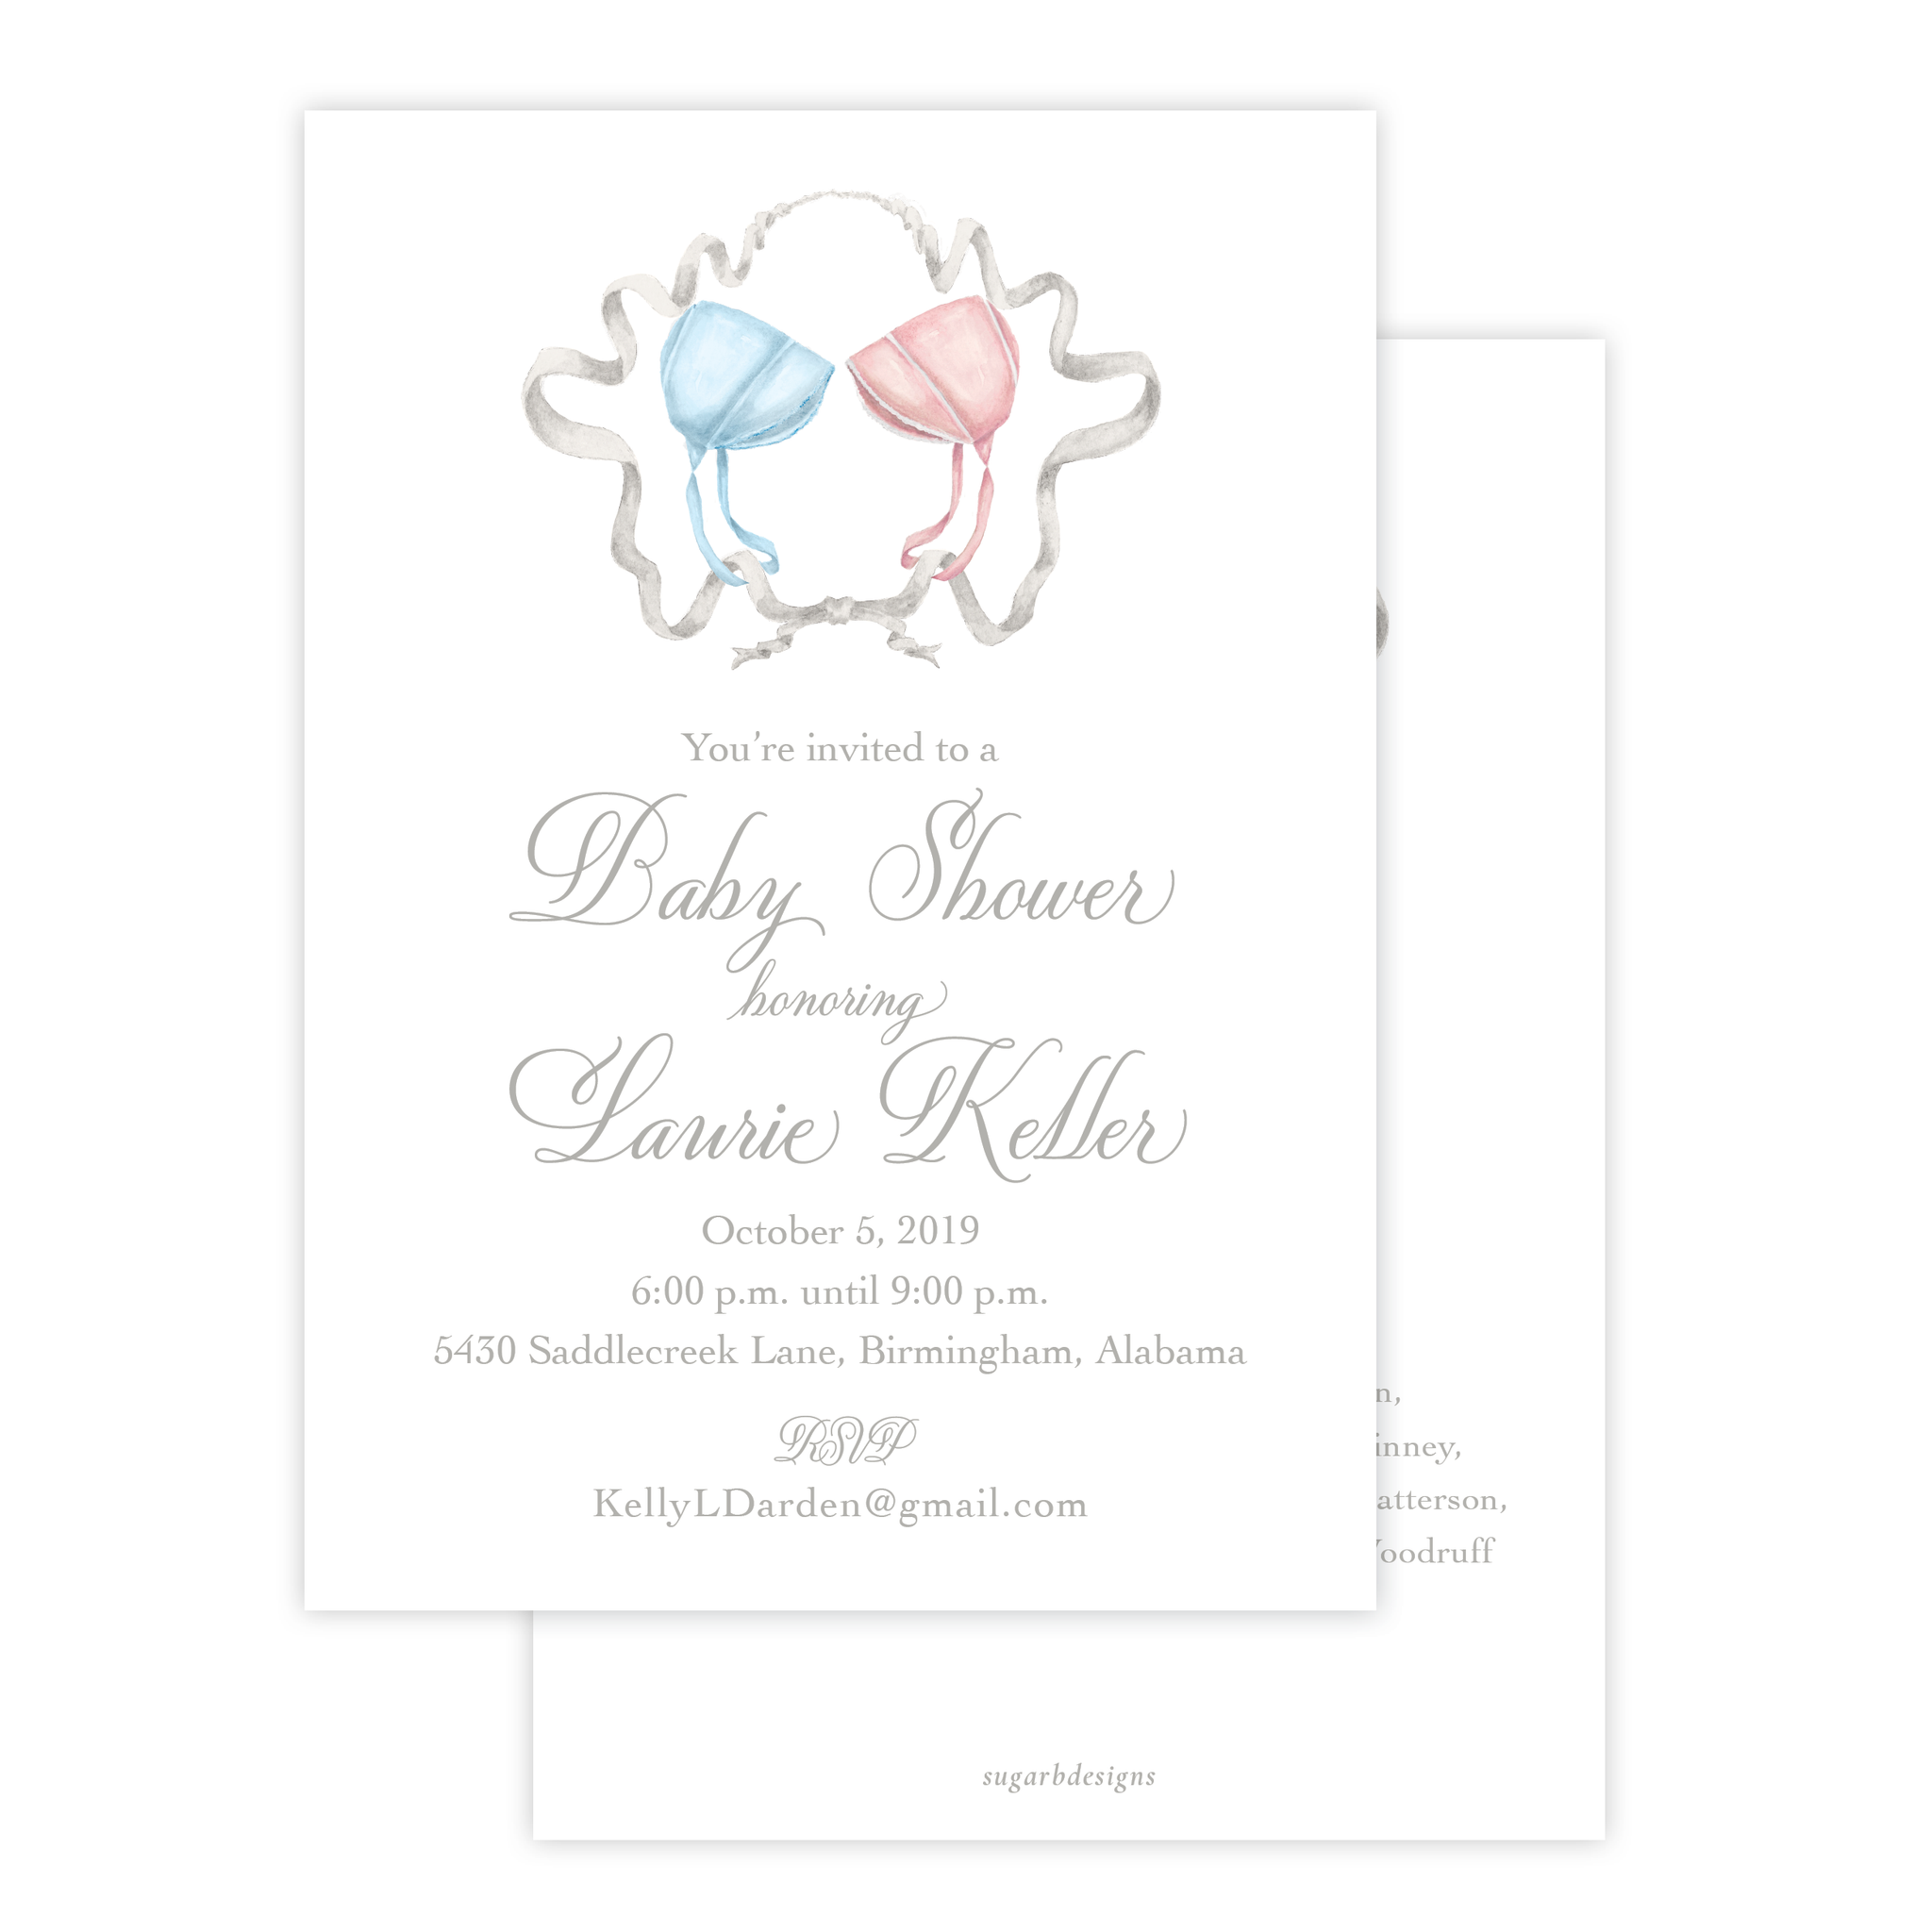 Bailey's Bonnet Pink and Blue Twins Sash Wreath Baby Shower Invitation